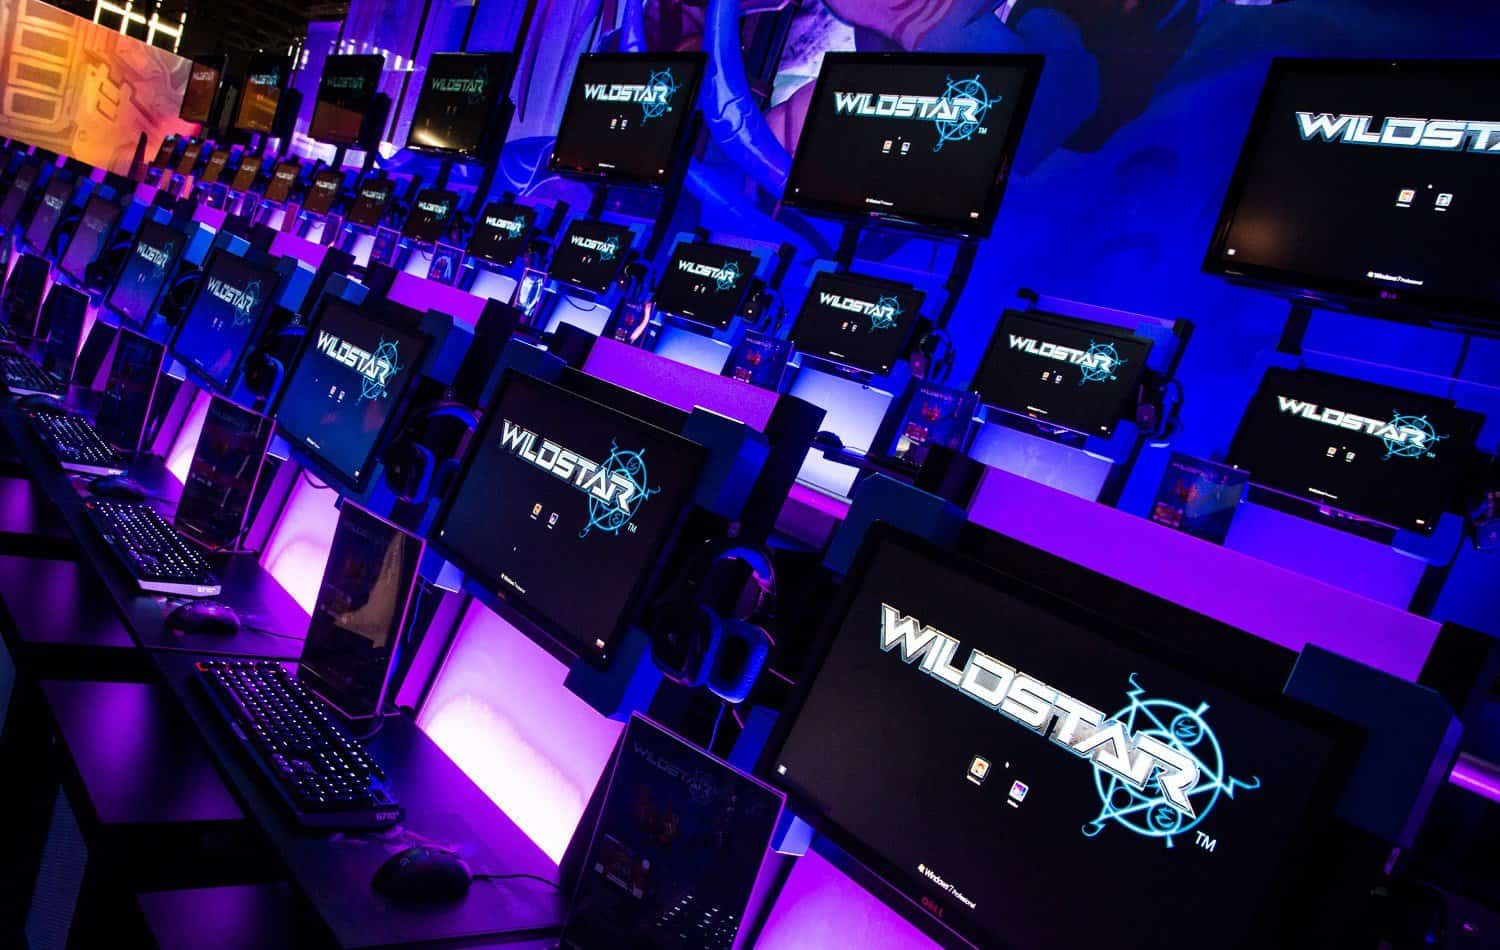 Top 11 WILDEST Gaming Conventions in Europe